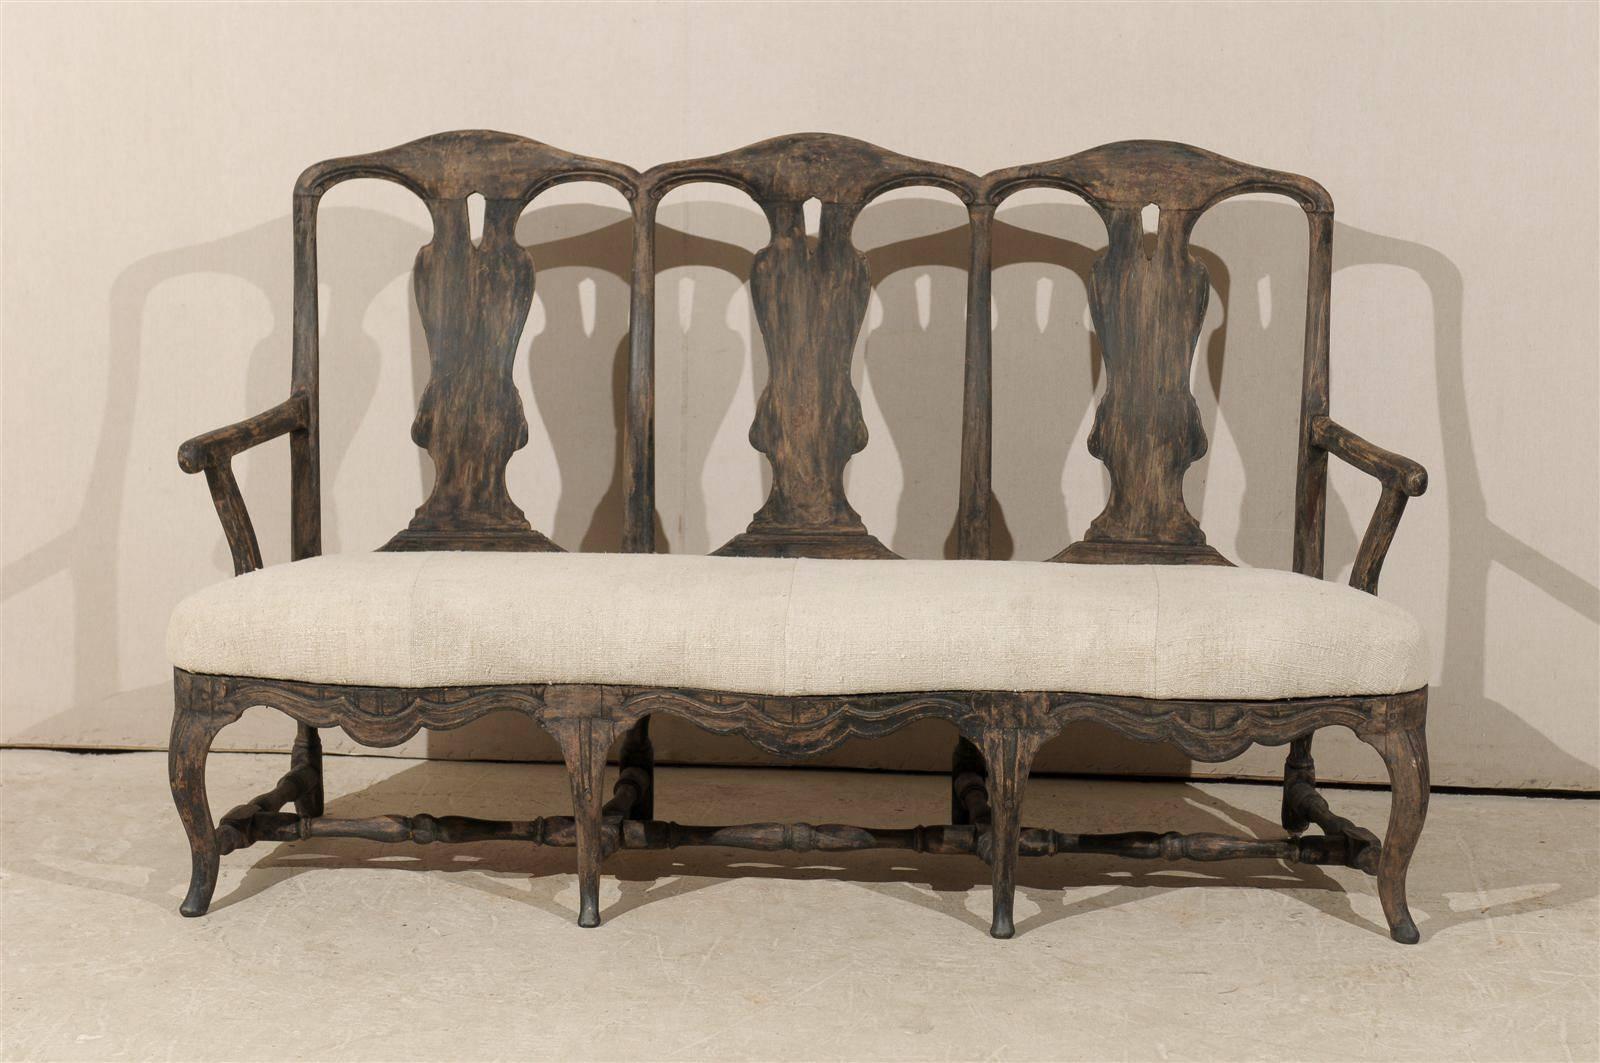 A Swedish period Rococo 19th century three-chair back sofa scraped to its original finish, cabriole legs, nicely carved skirt and cross stretcher and upholstered seat.